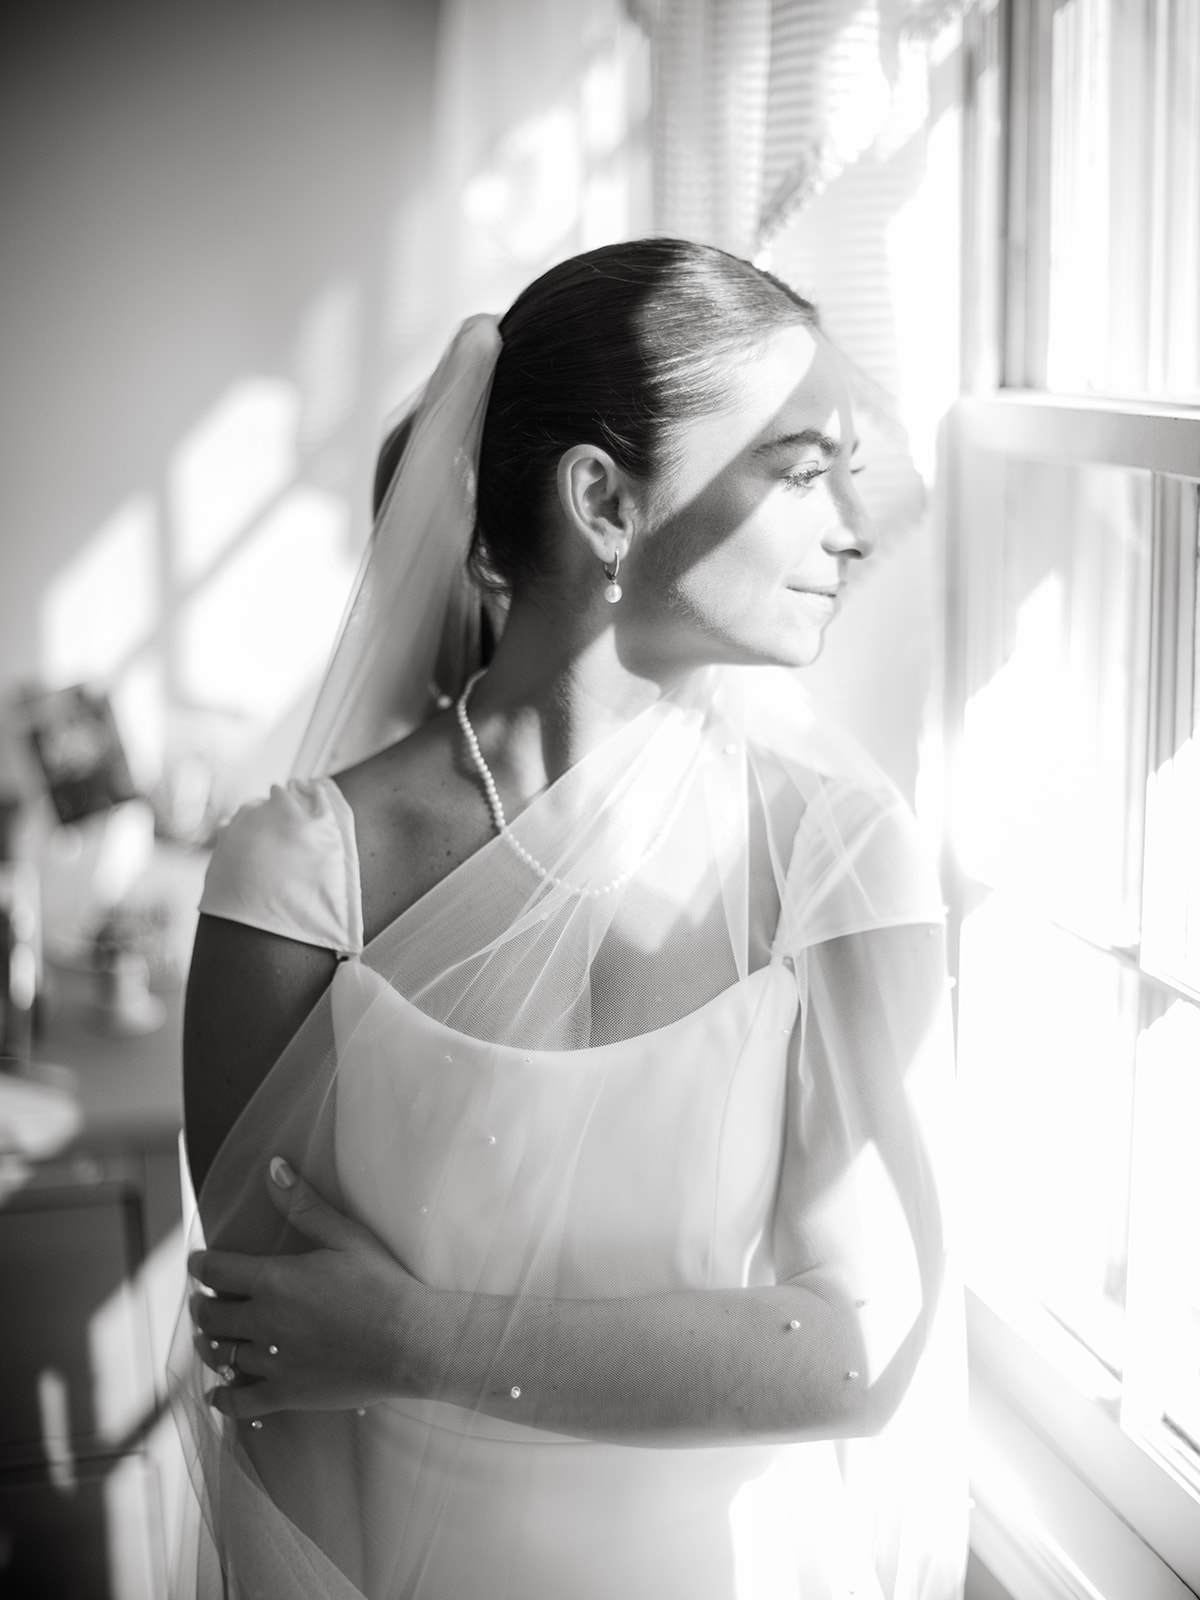 A bride looks out the window after getting ready for her wedding day, letting the light shine on her face.